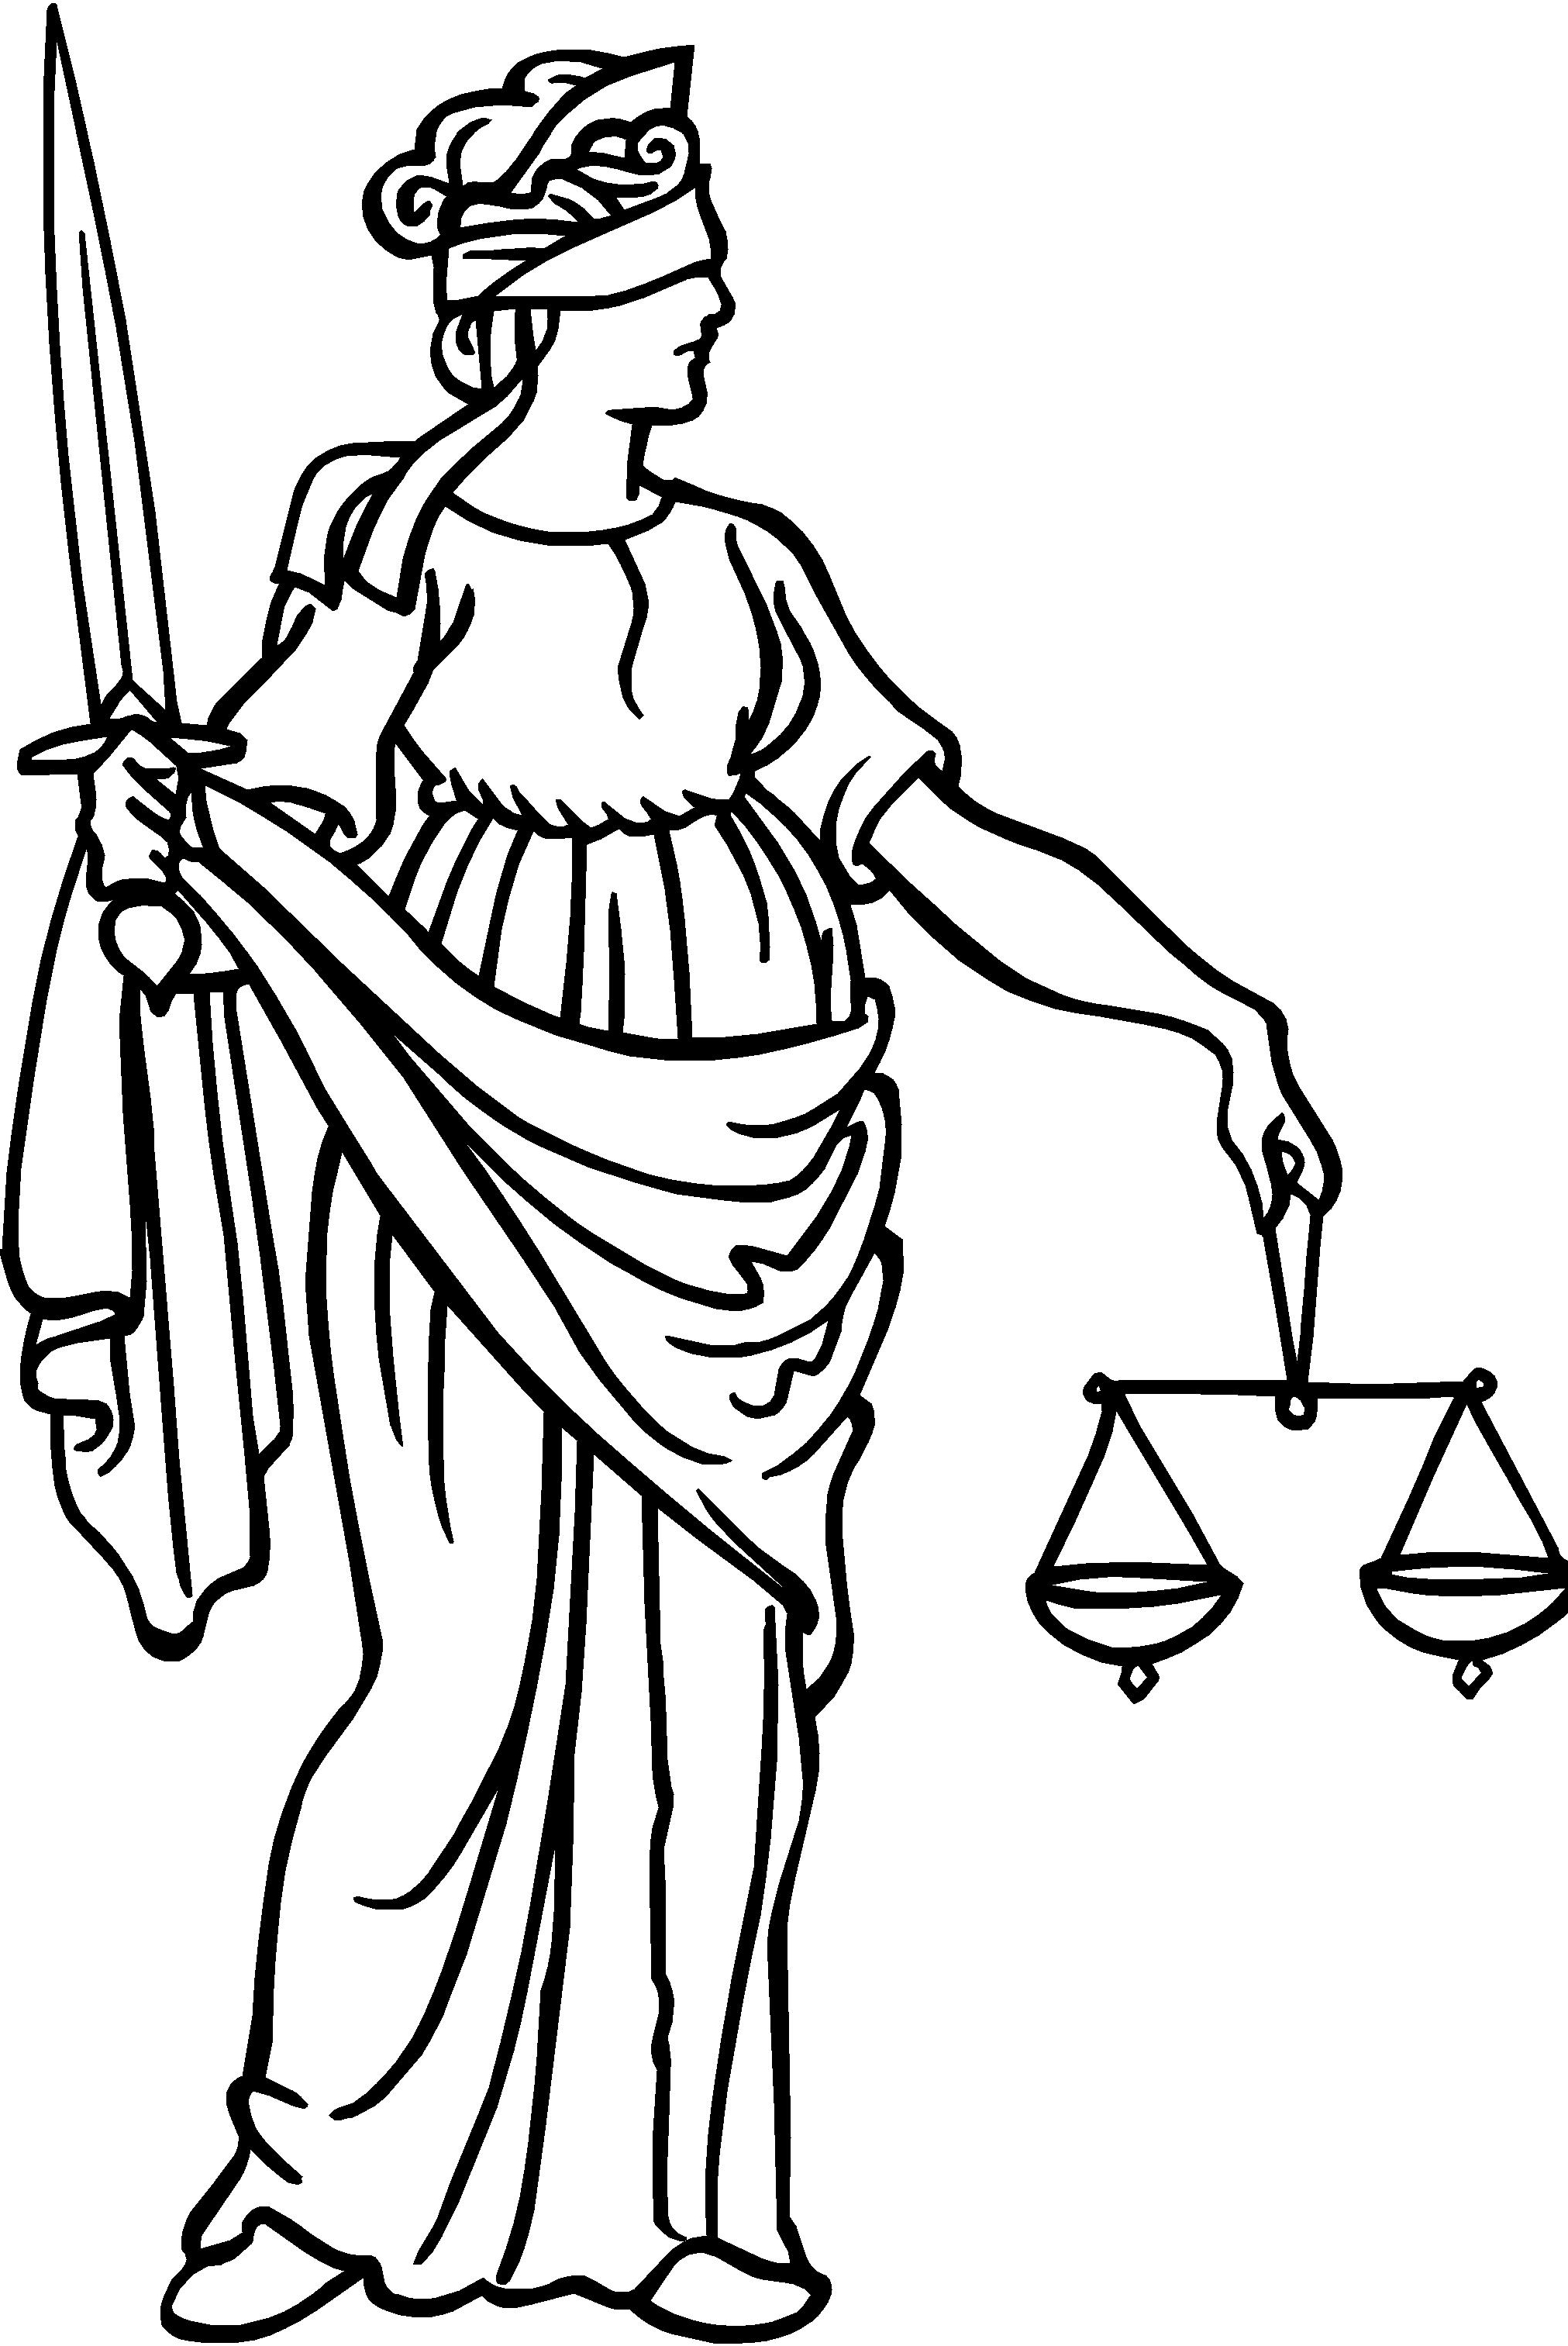 Lady justice free clipart